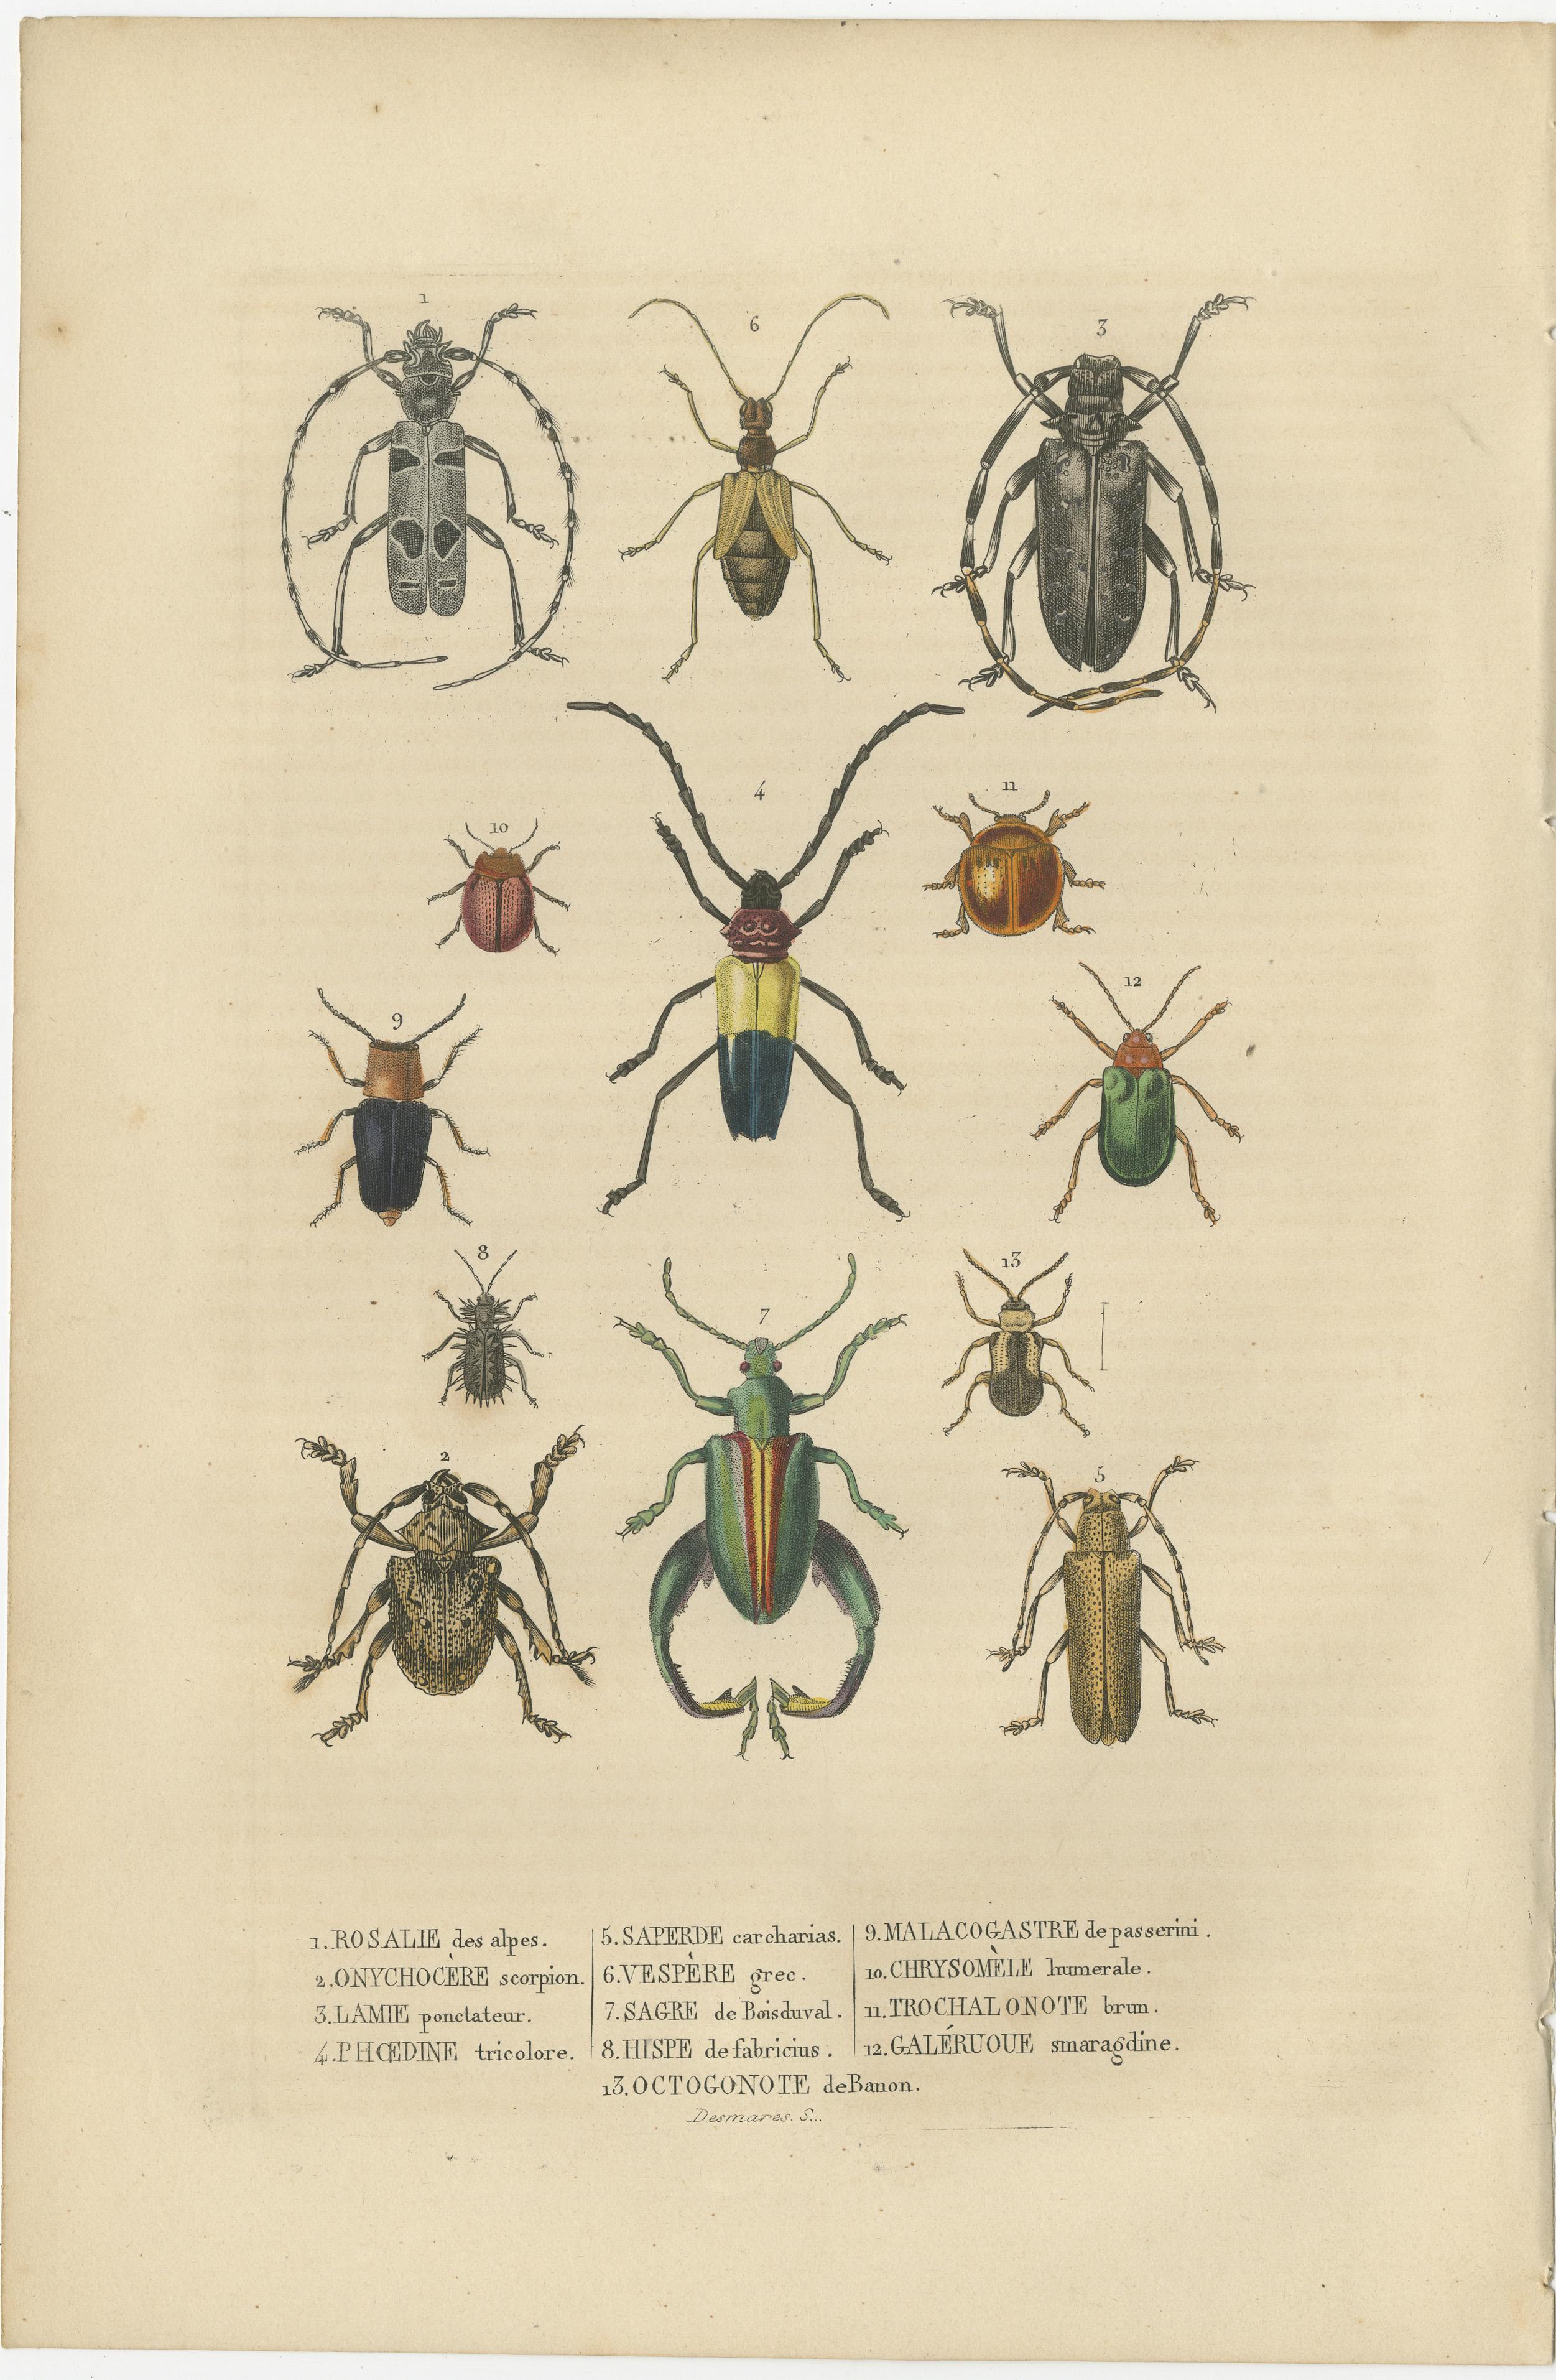 These prints are a collection of meticulously handcolored engravings from the year 1845, each depicting various species of beetles. The level of detail in each illustration is exquisite, with precise linework that captures the intricate textures of